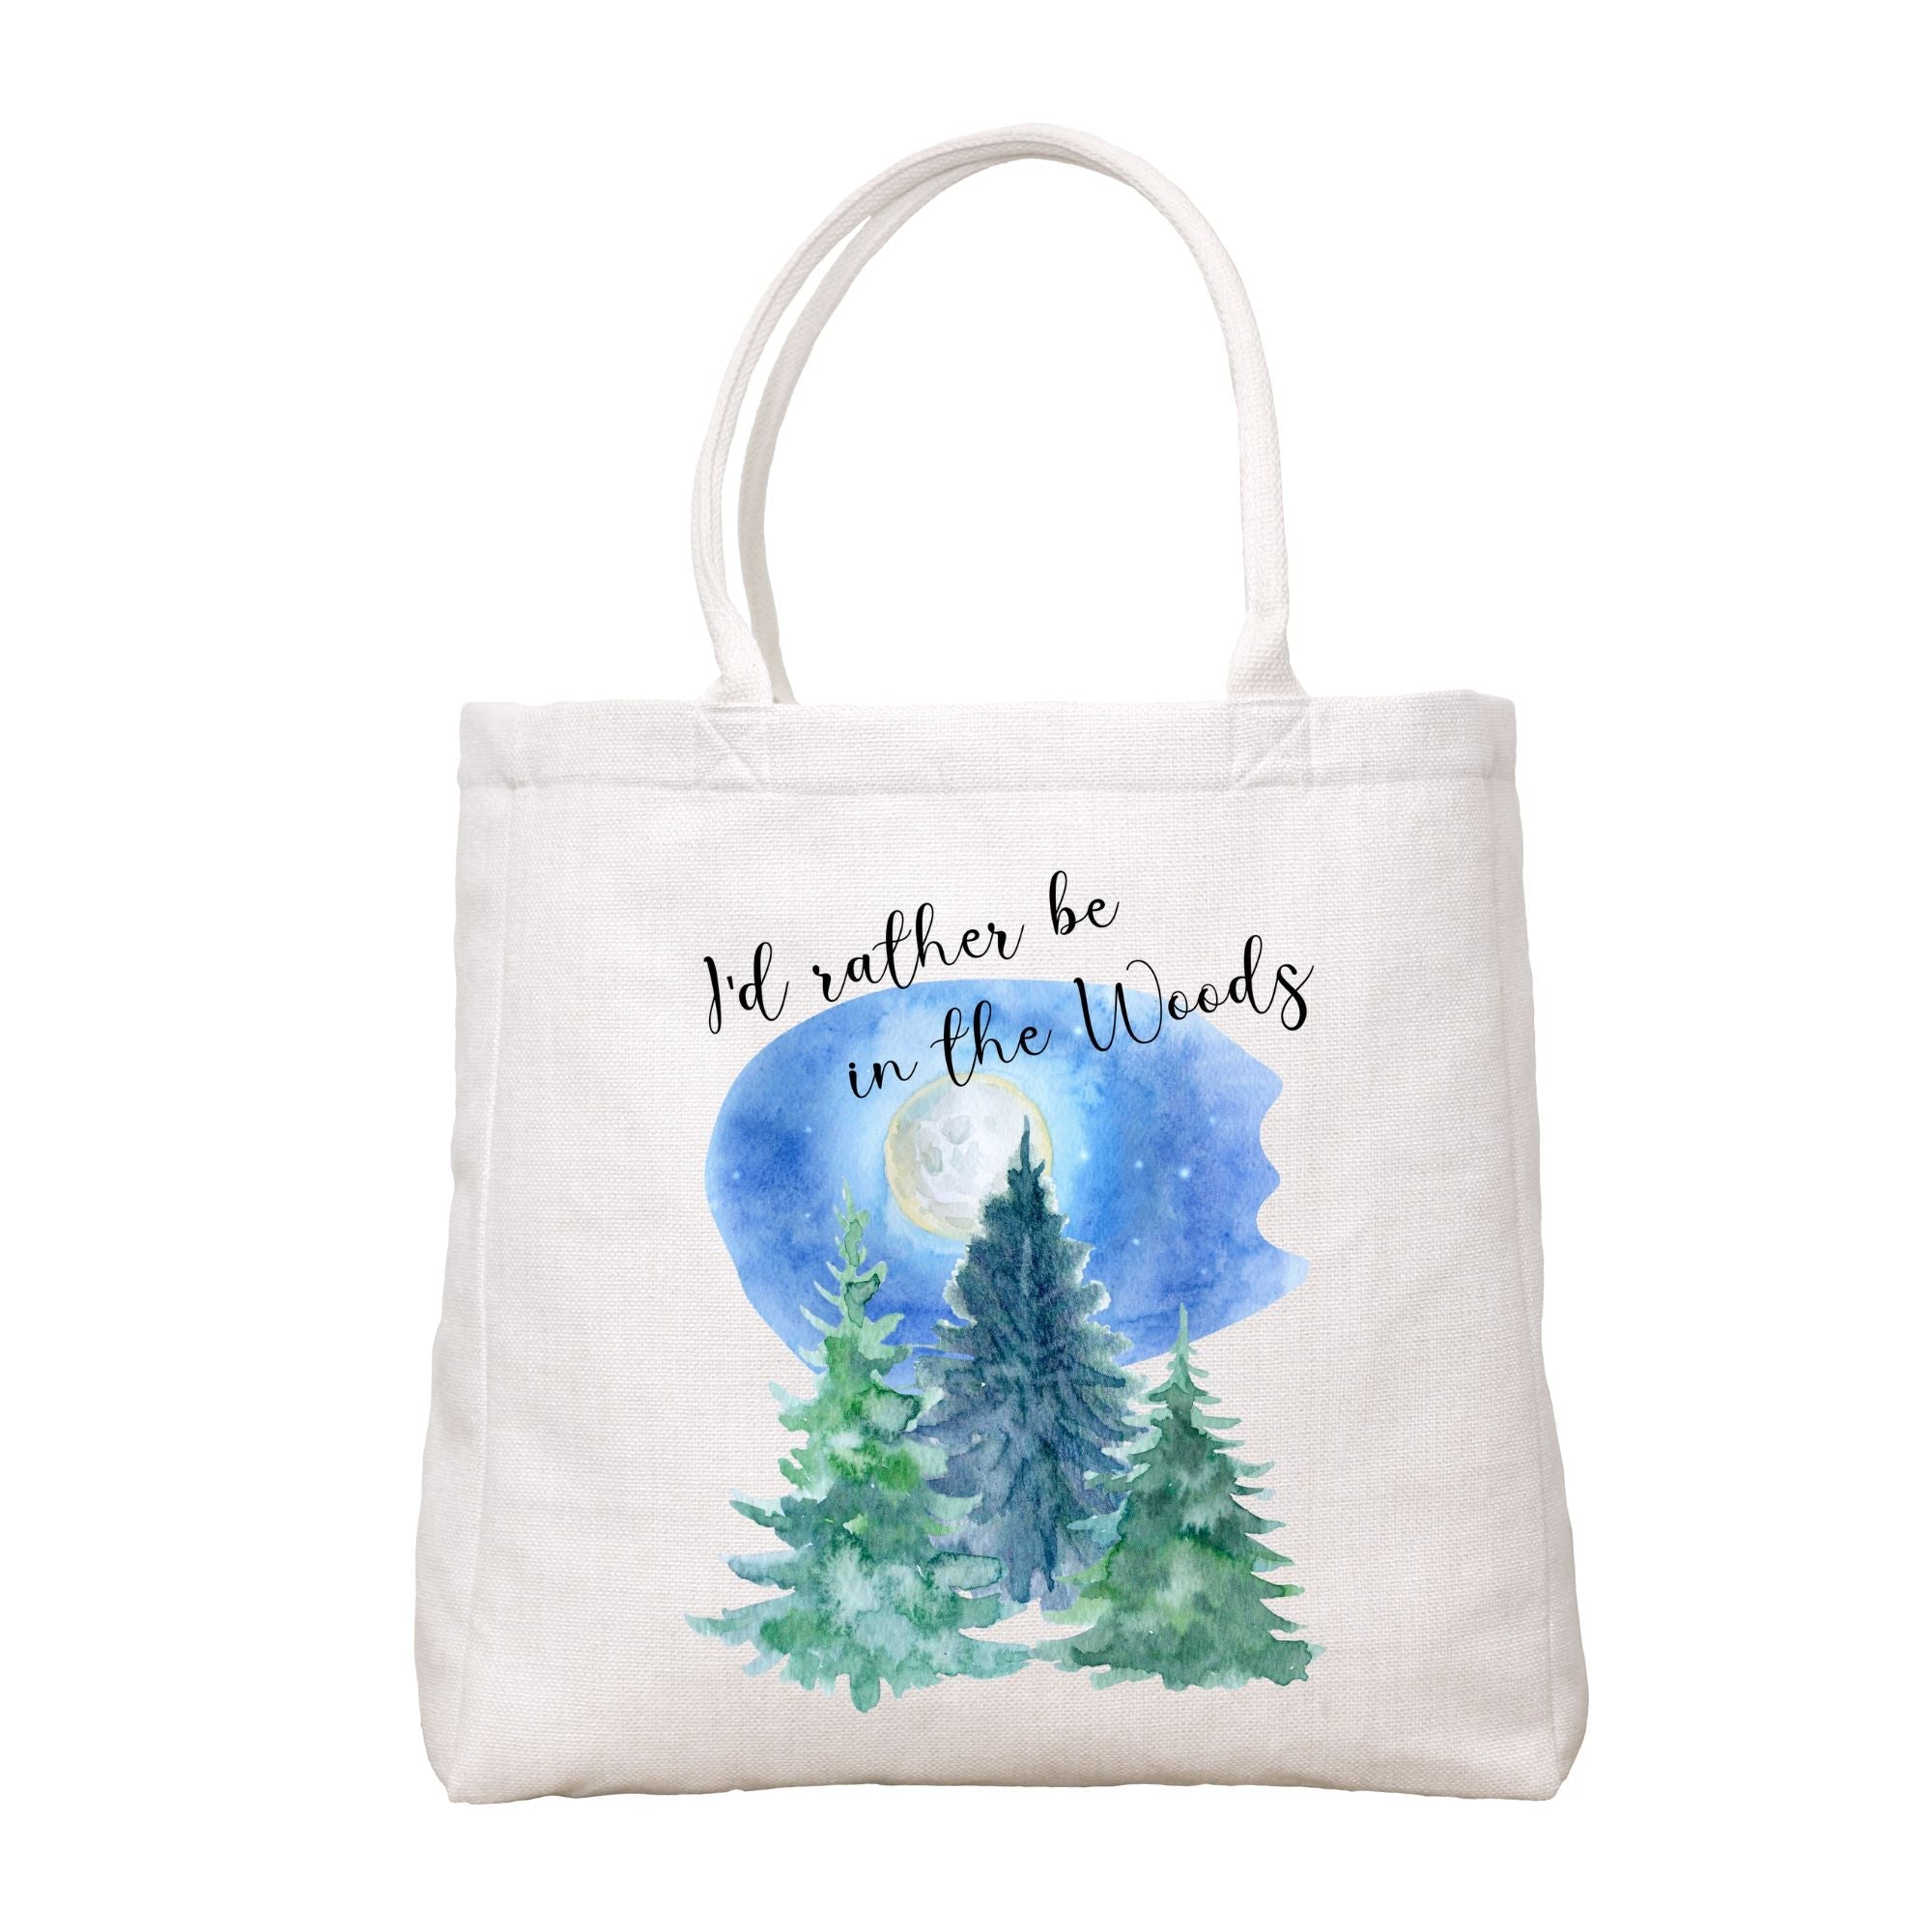 I'D Rather Be In The Woods Tote Bag